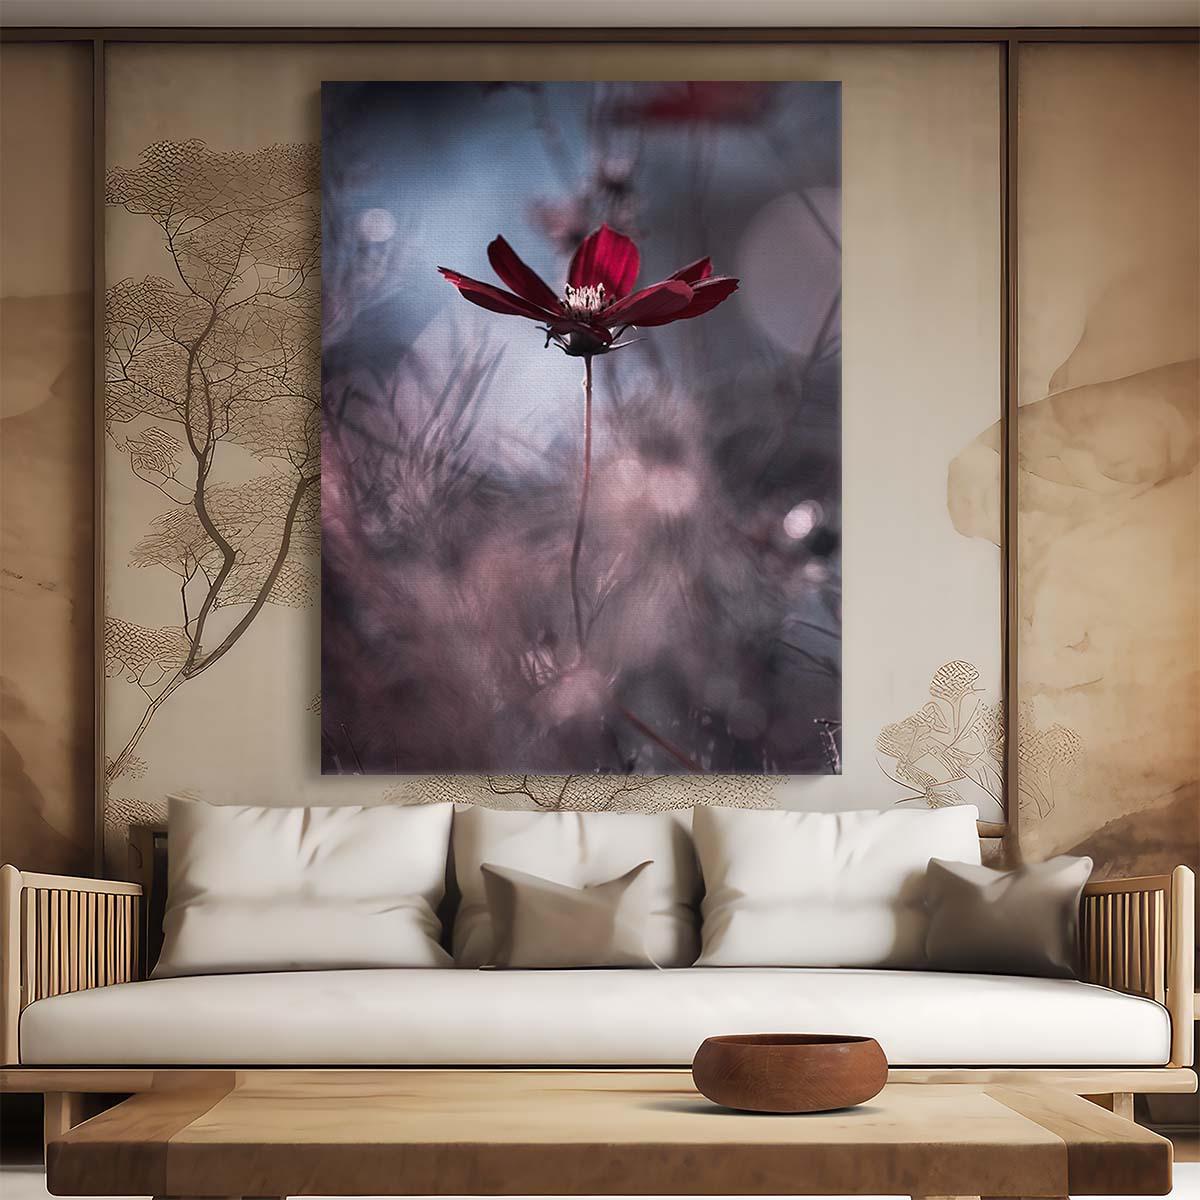 Delicate Red Flower Macro Photography Art by Fabien Bravin by Luxuriance Designs, made in USA